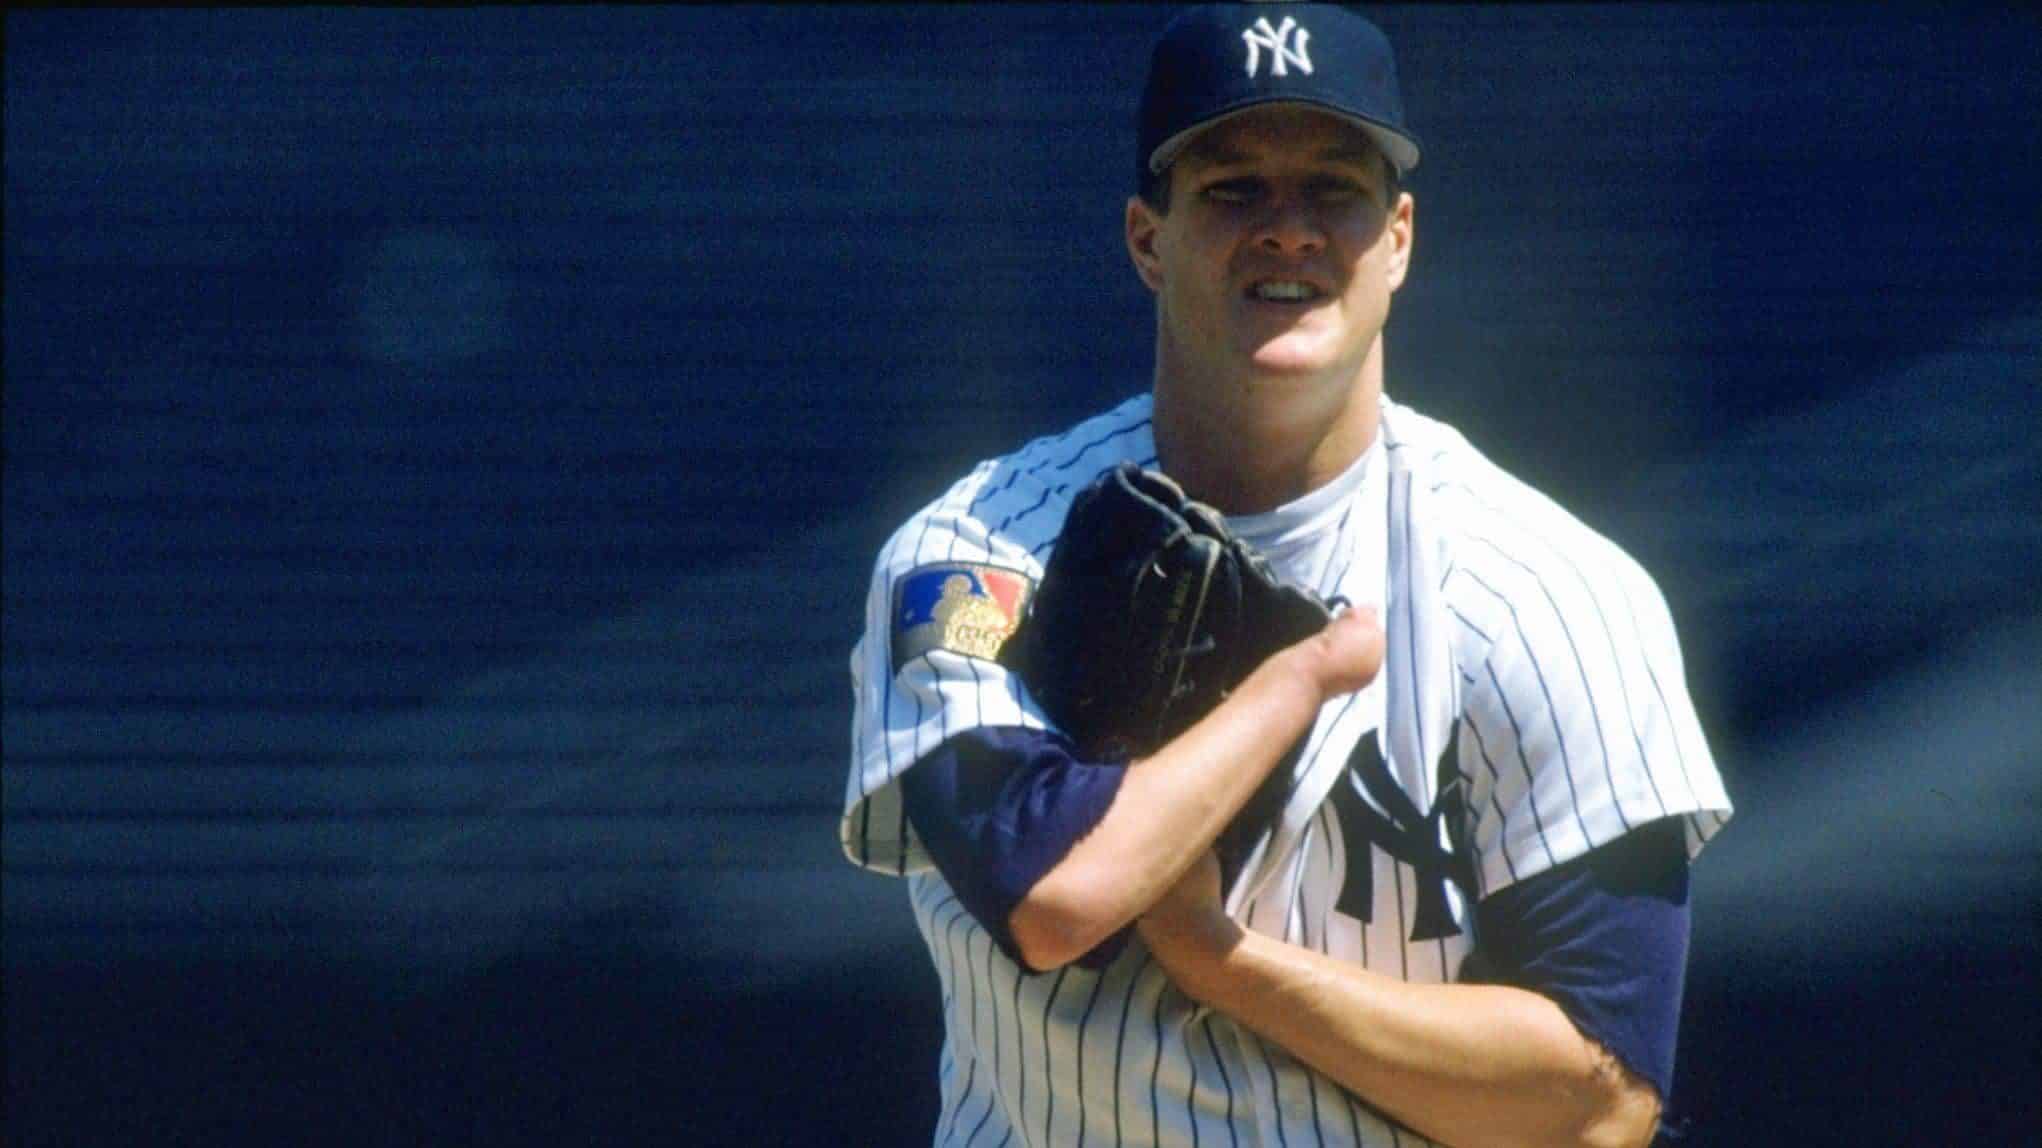 One-Handed Jim Abbott Throws No-Hitter  #OTD in 1993 🗓️ Yankees pitcher Jim  Abbott, who was born without a right hand, threw a no-hitter 🤯 One of the  coolest baseball stories of